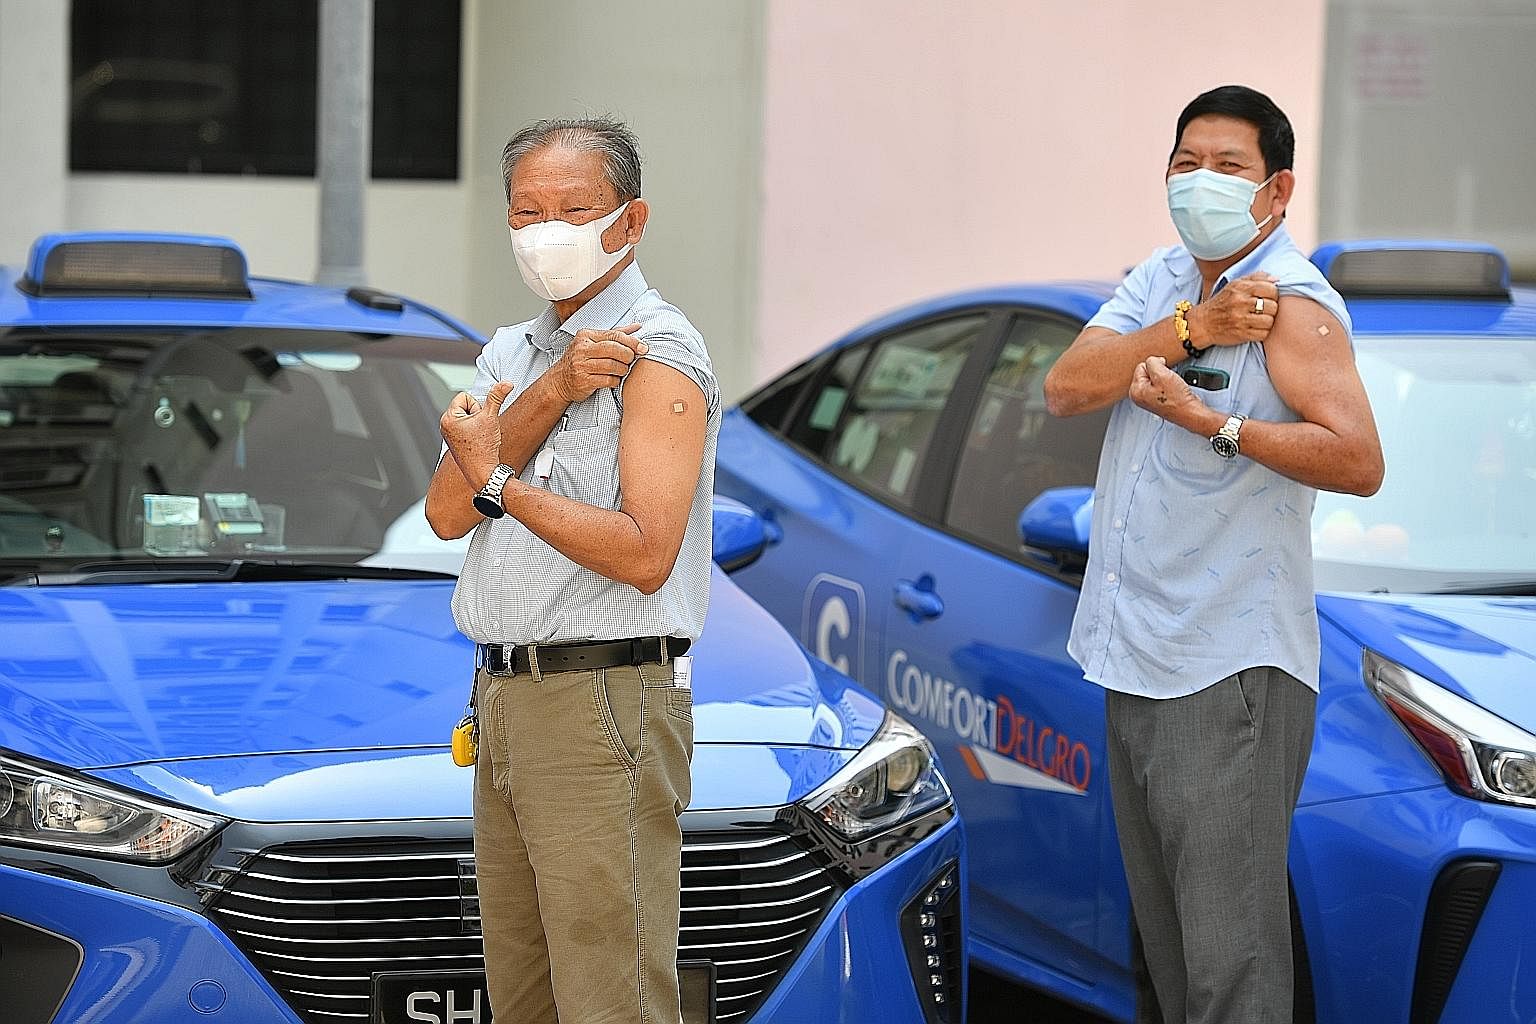 More than 50,000 active taxi and private-hire car drivers will be offered the chance to get their first dose of the Covid-19 vaccine by the end of this week. About 300 drivers, including cabbies Tham Yuet Kok (right) and Tan Eng Chuan (far right), ha